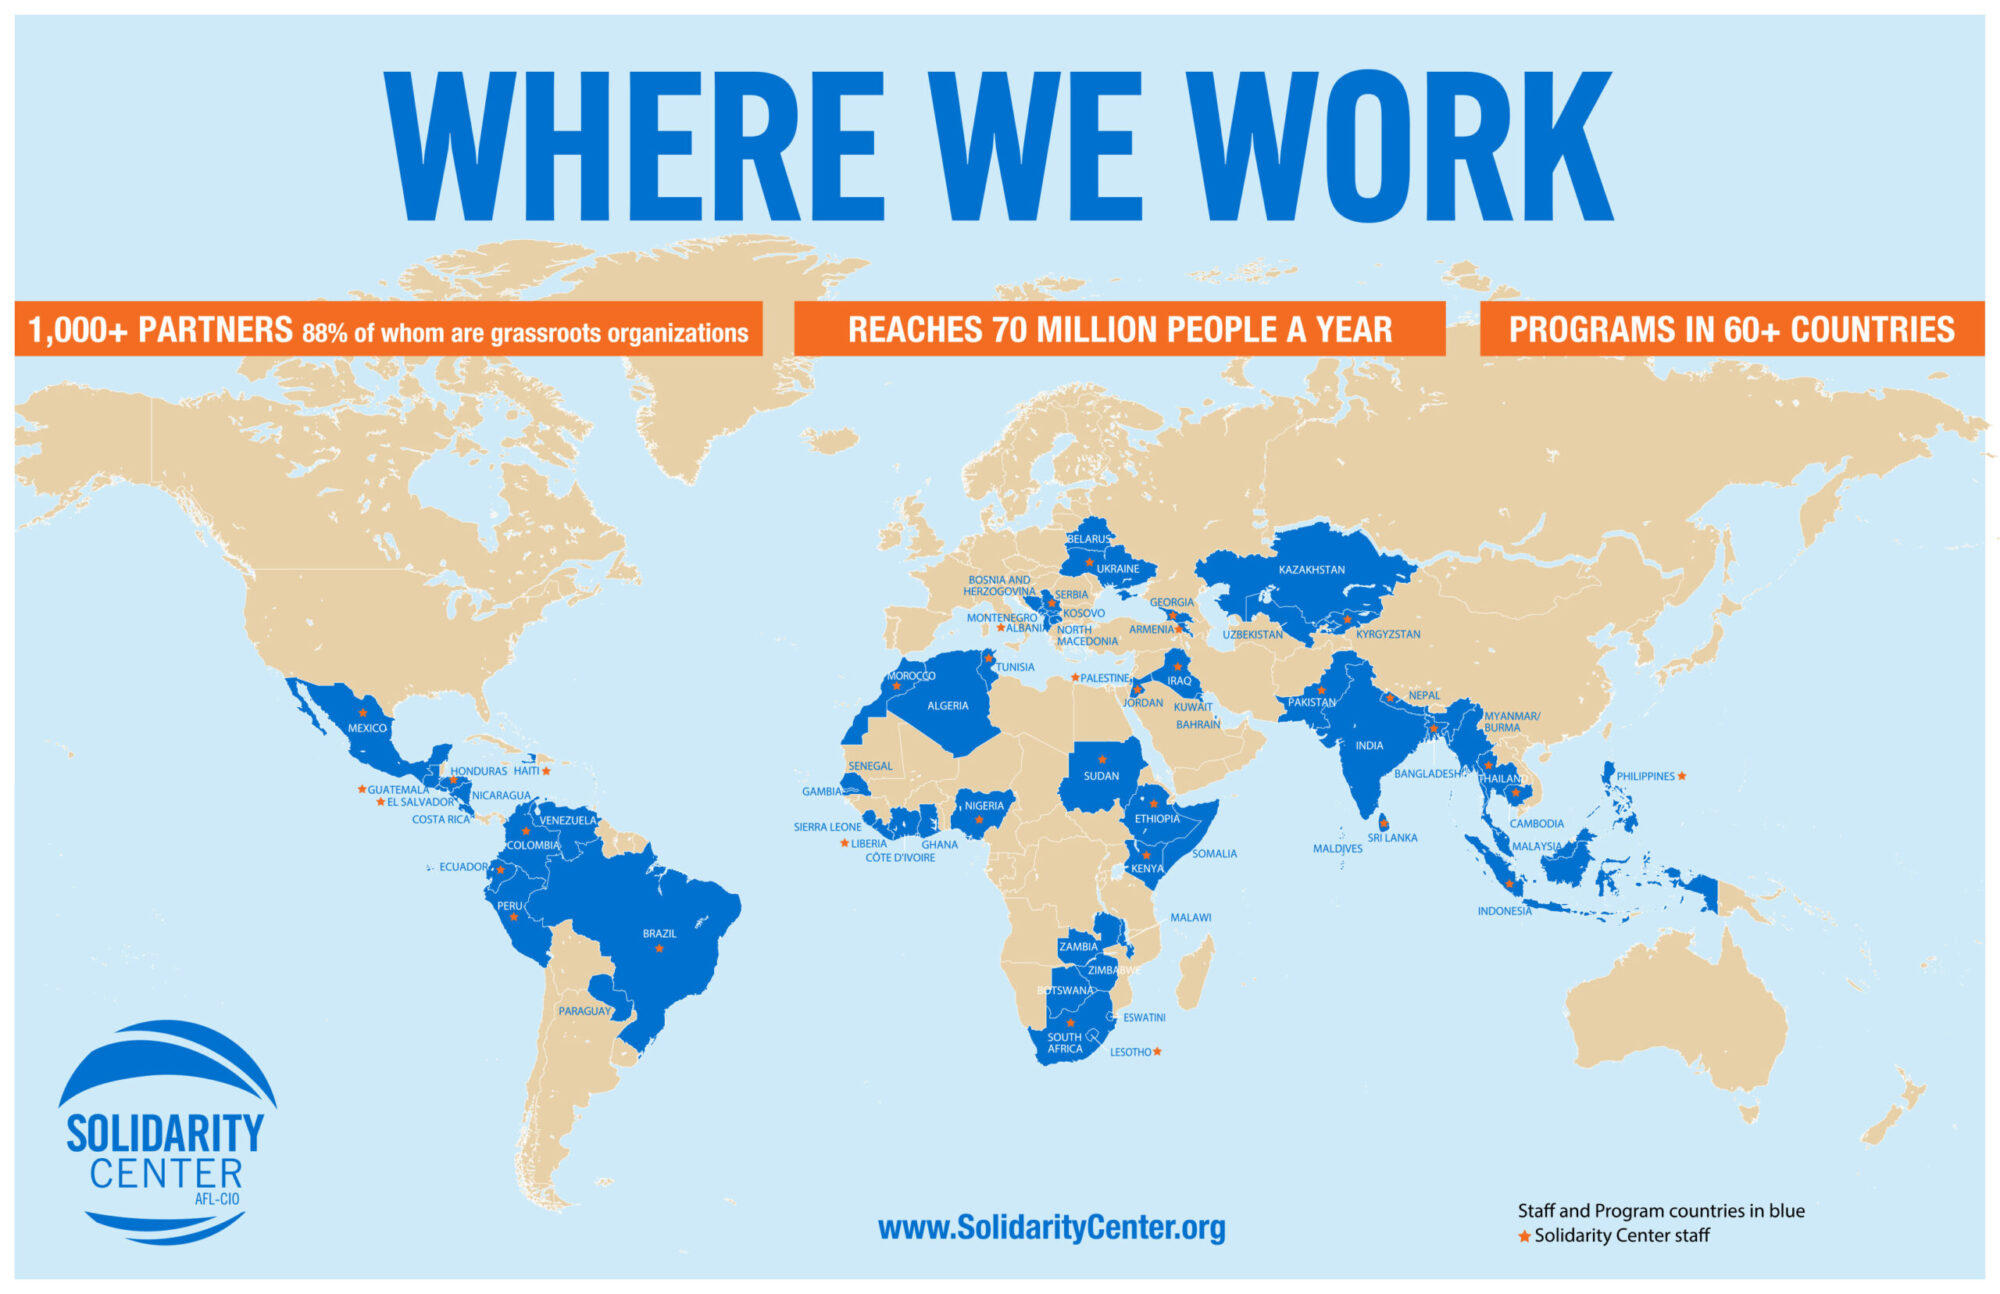 A map of the global areas that Solidarity Center works in